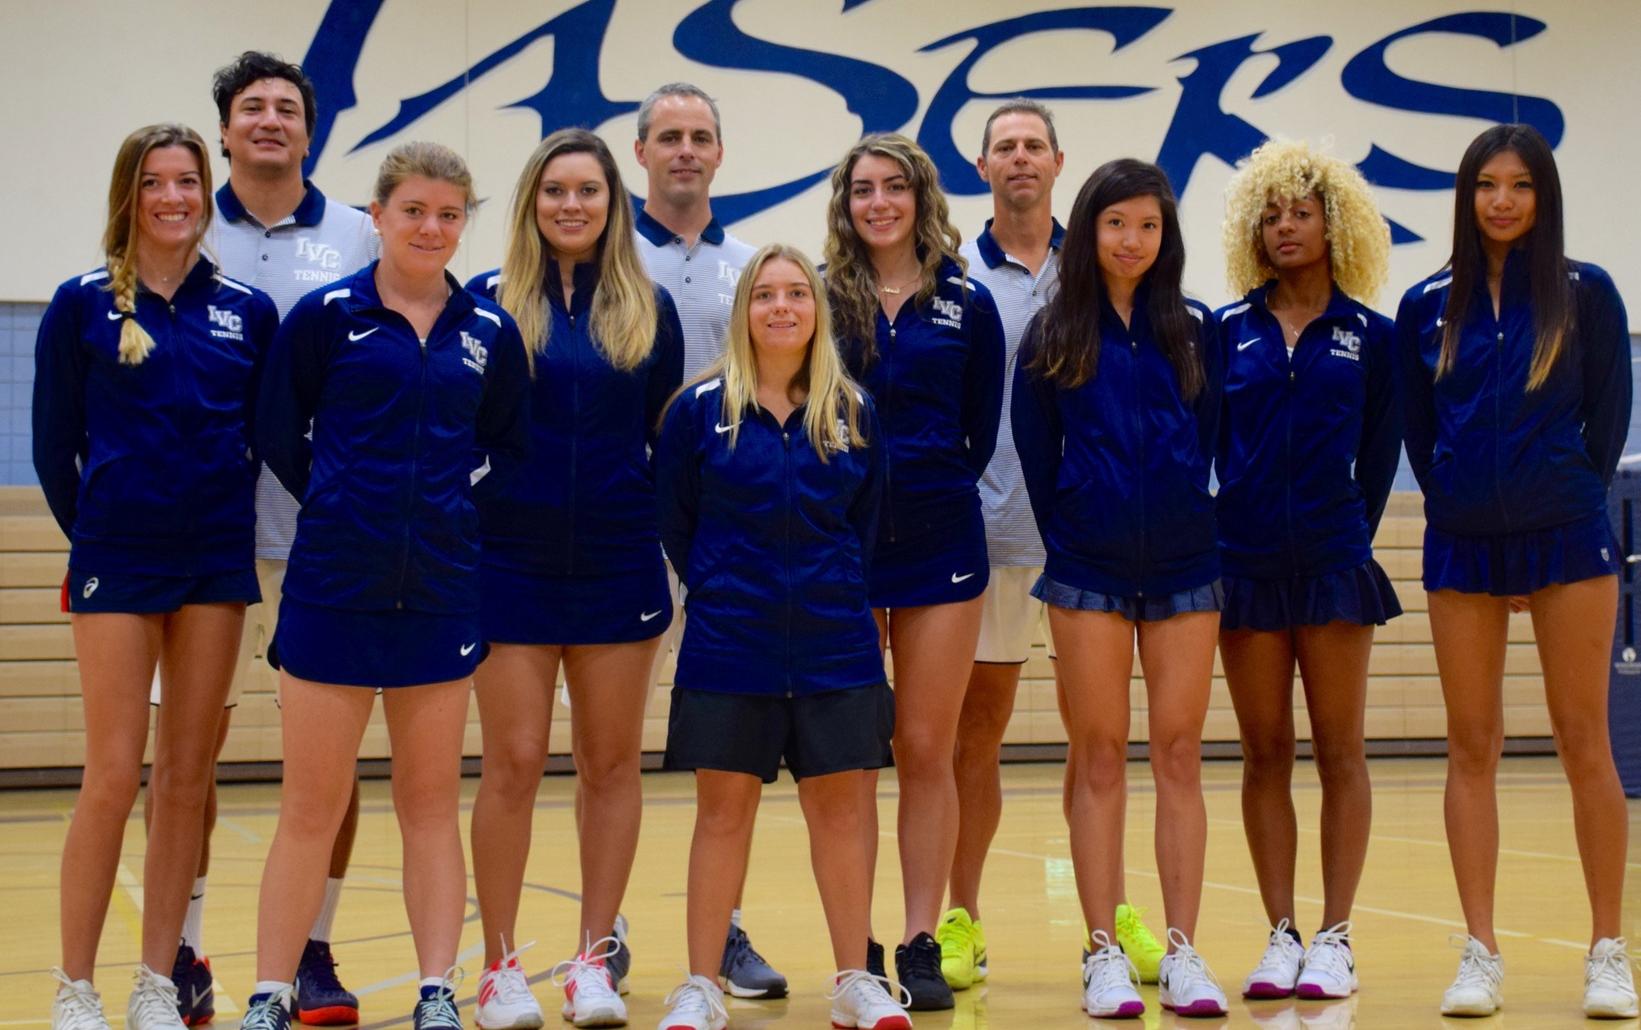 Women's tennis team tops defending conference champion